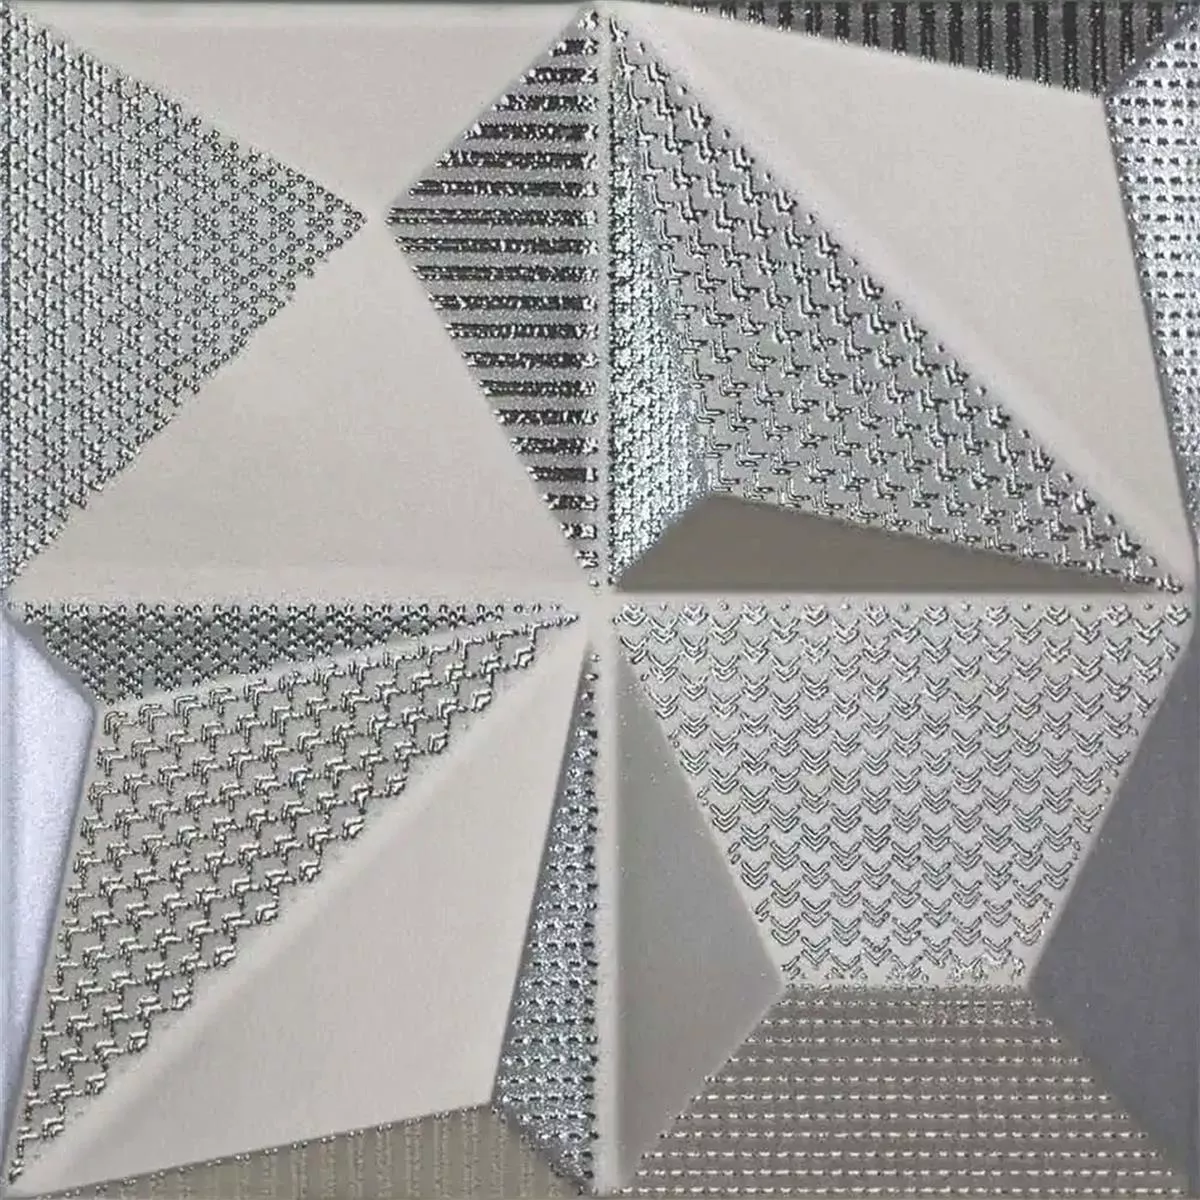 Wall Tiles Skyline 3D Mix Exclusive Structured Silver